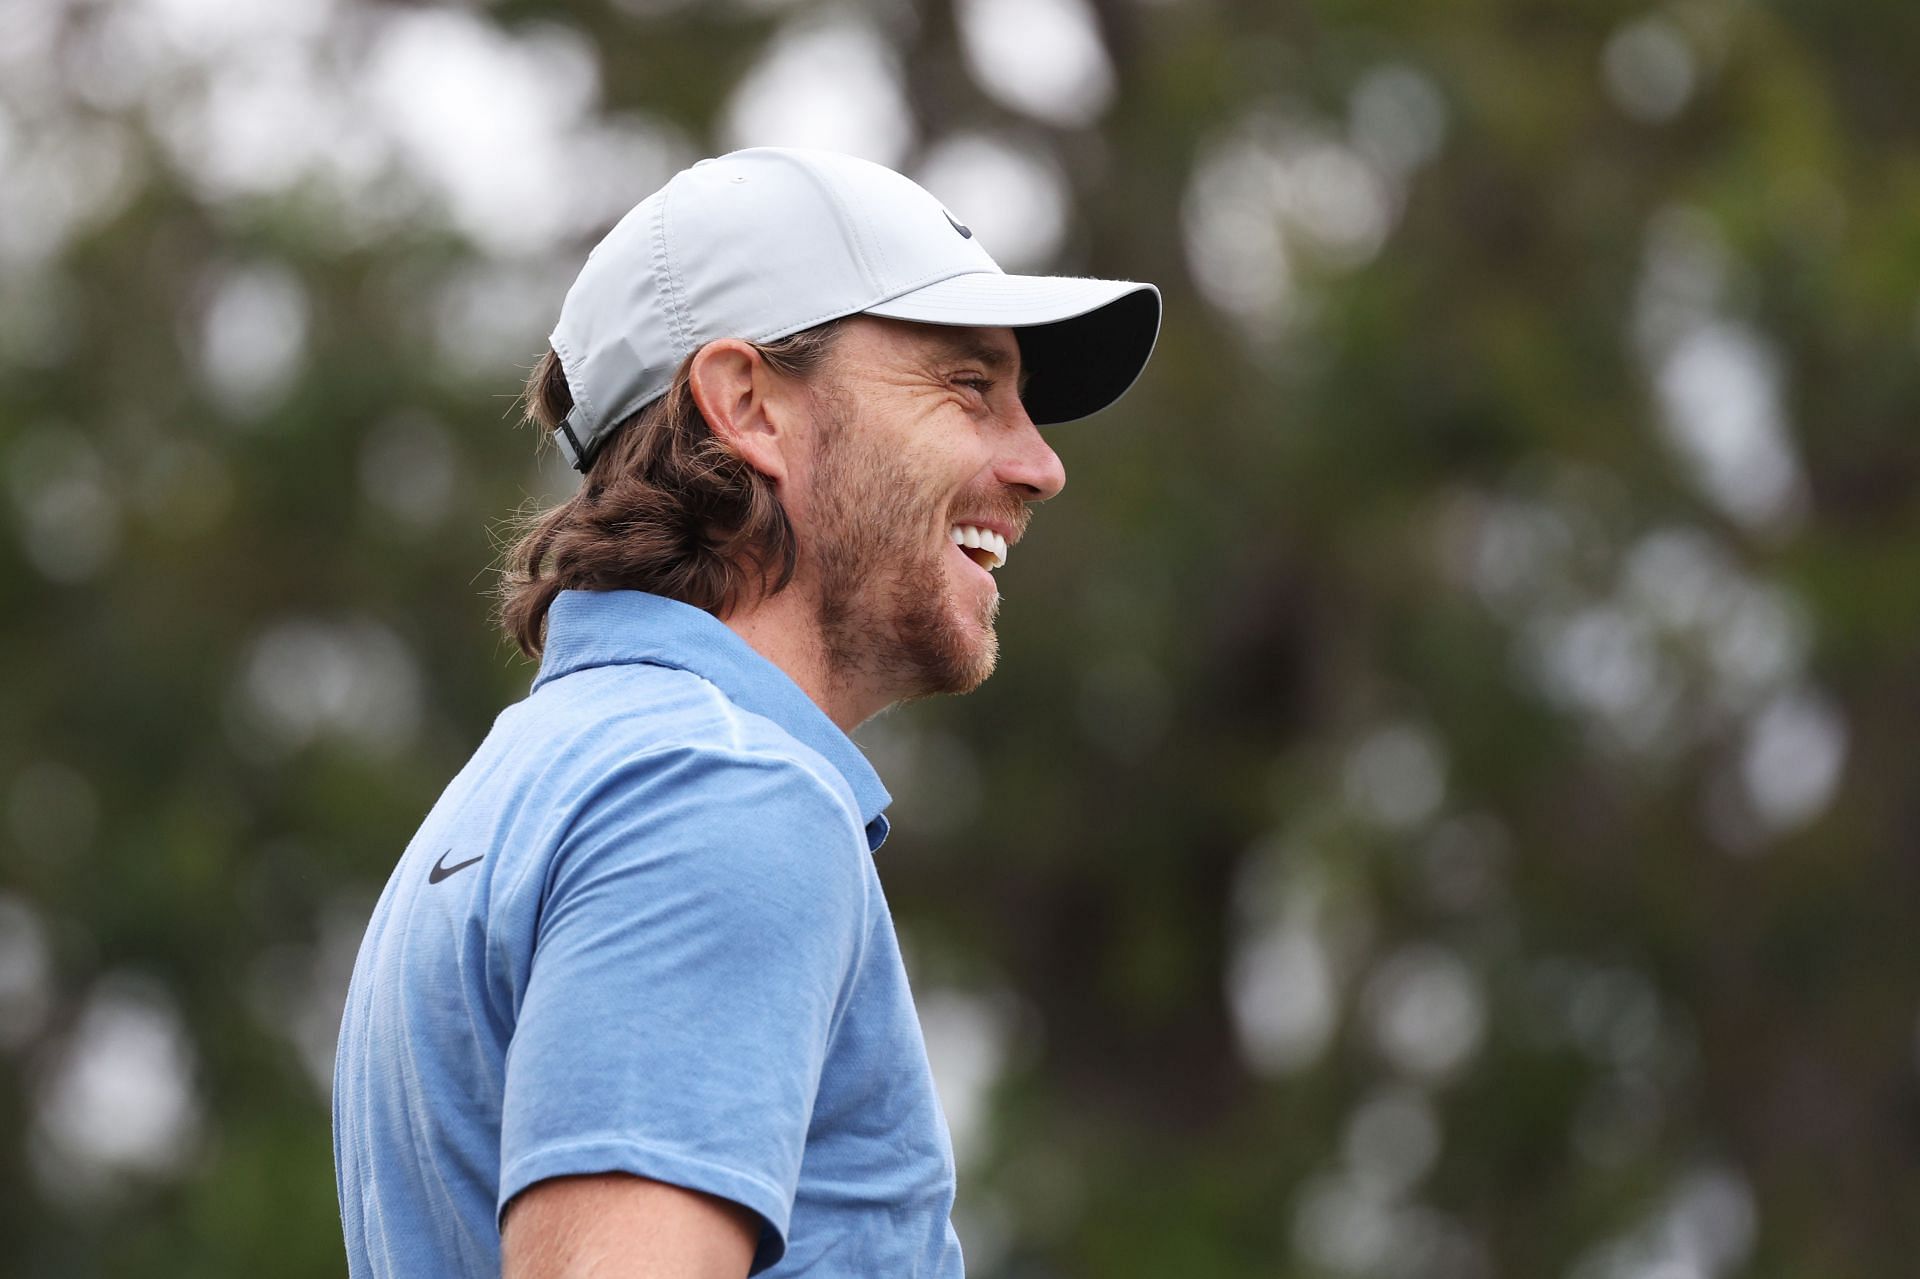 Tommy Fleetwood at the 123rd U.S. Open Championship - Practice Day 2